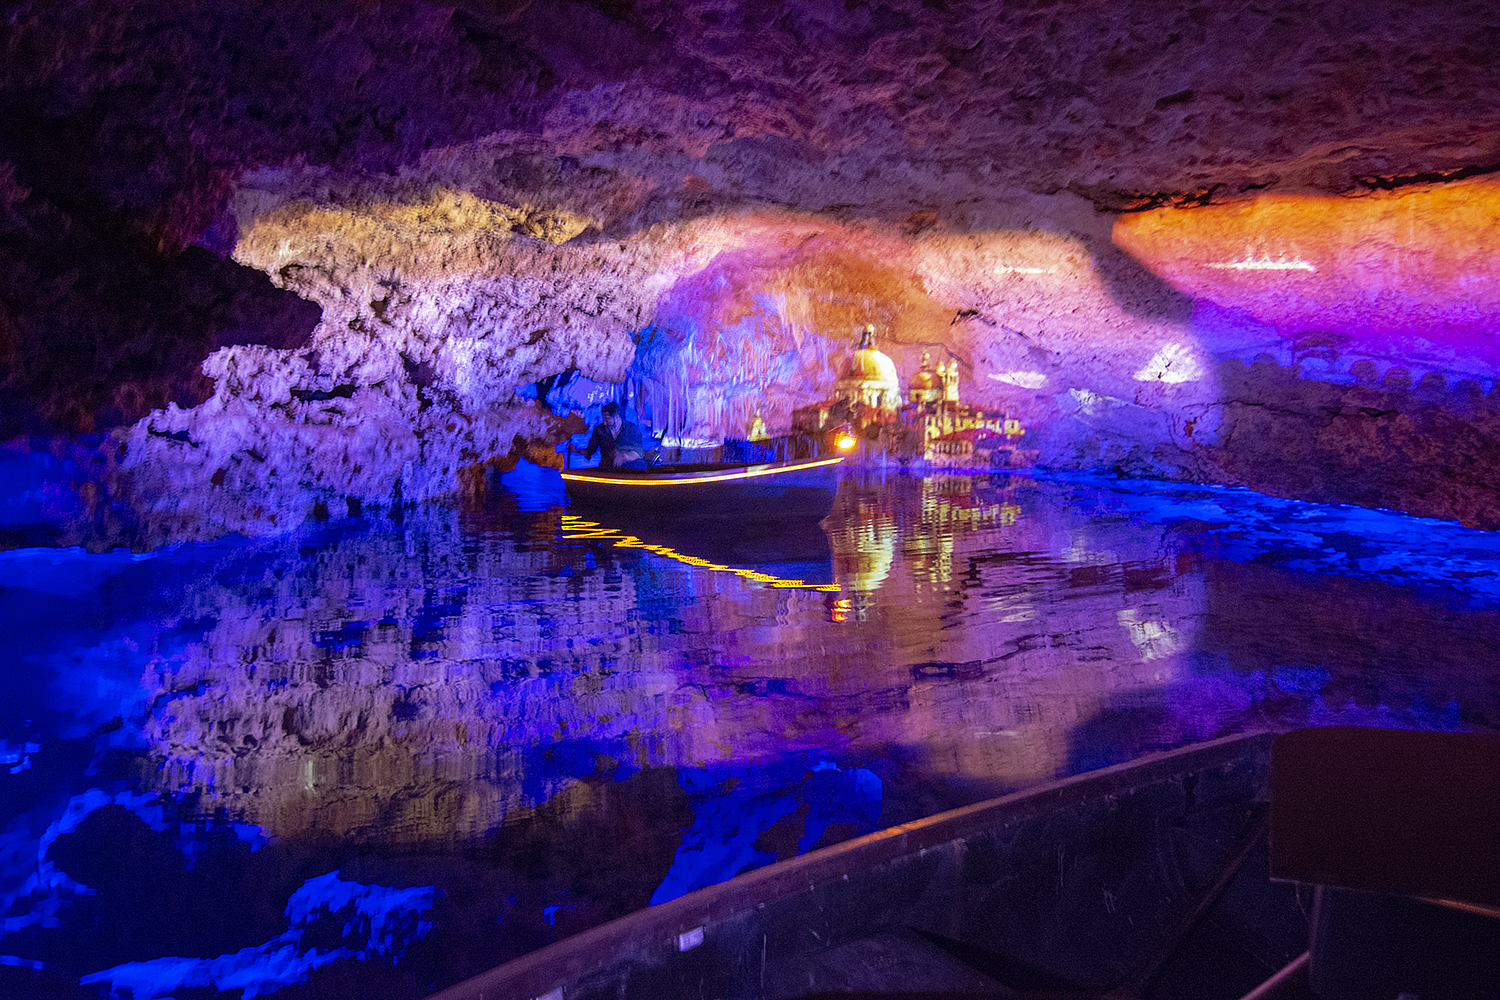 Cave Interior Lit In Colors And Boat On The Lake